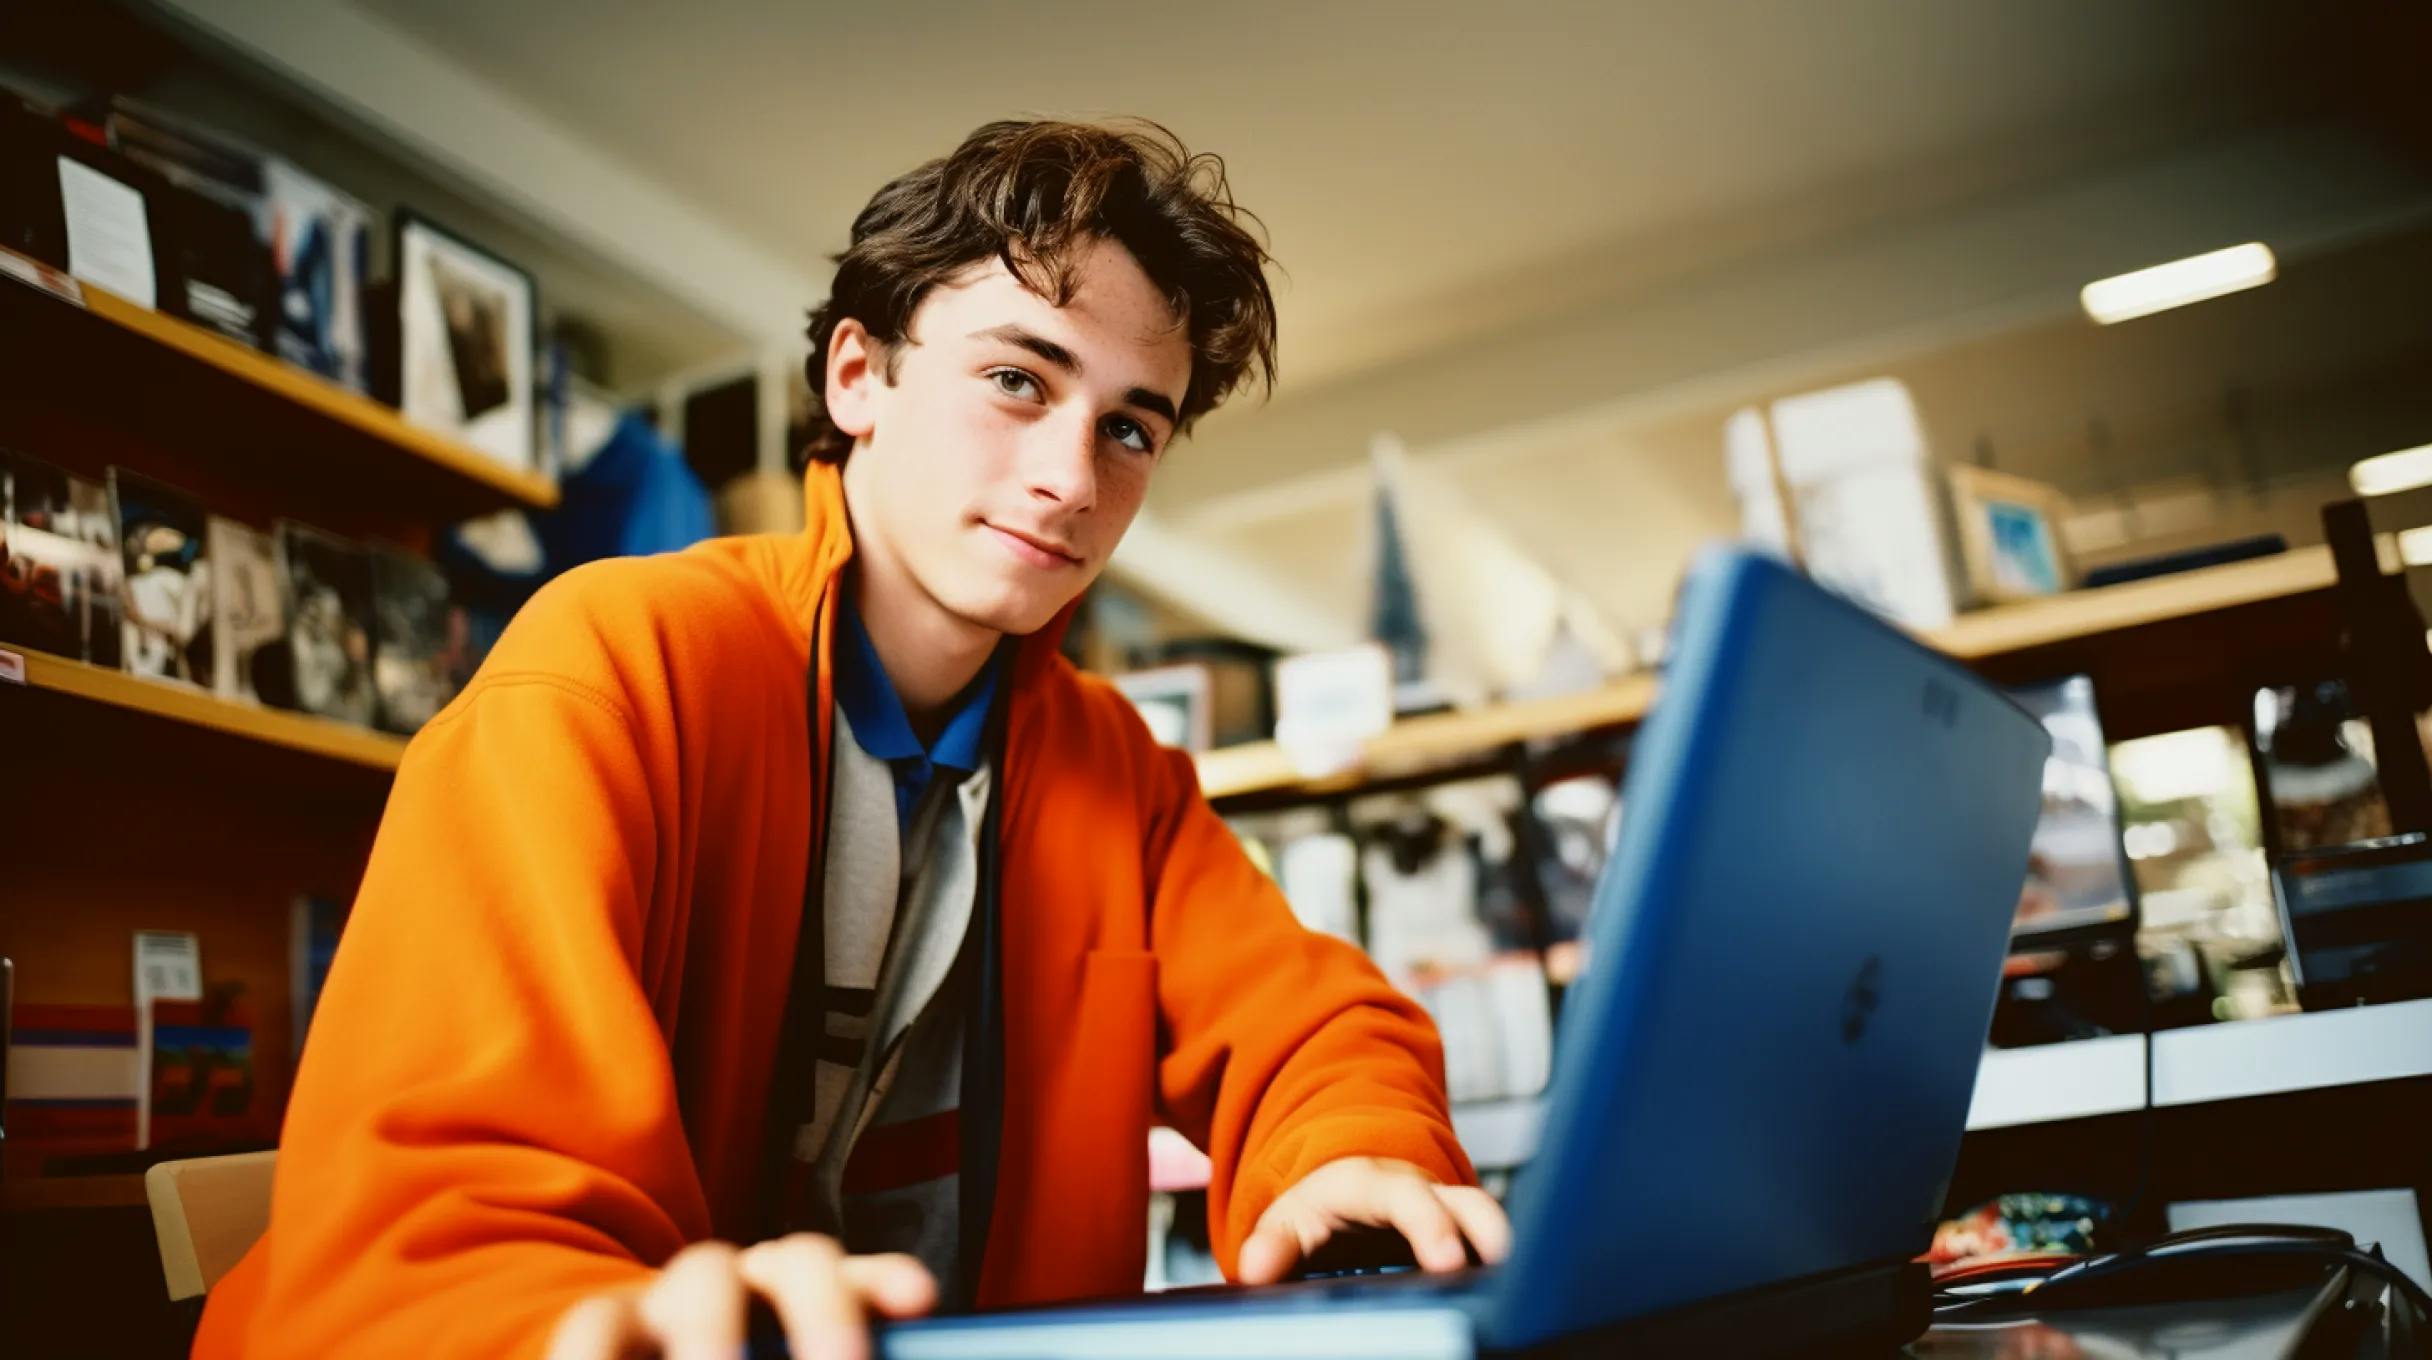  A boy wearing an orange sweater, sitting at a desk with a laptop in front of him.